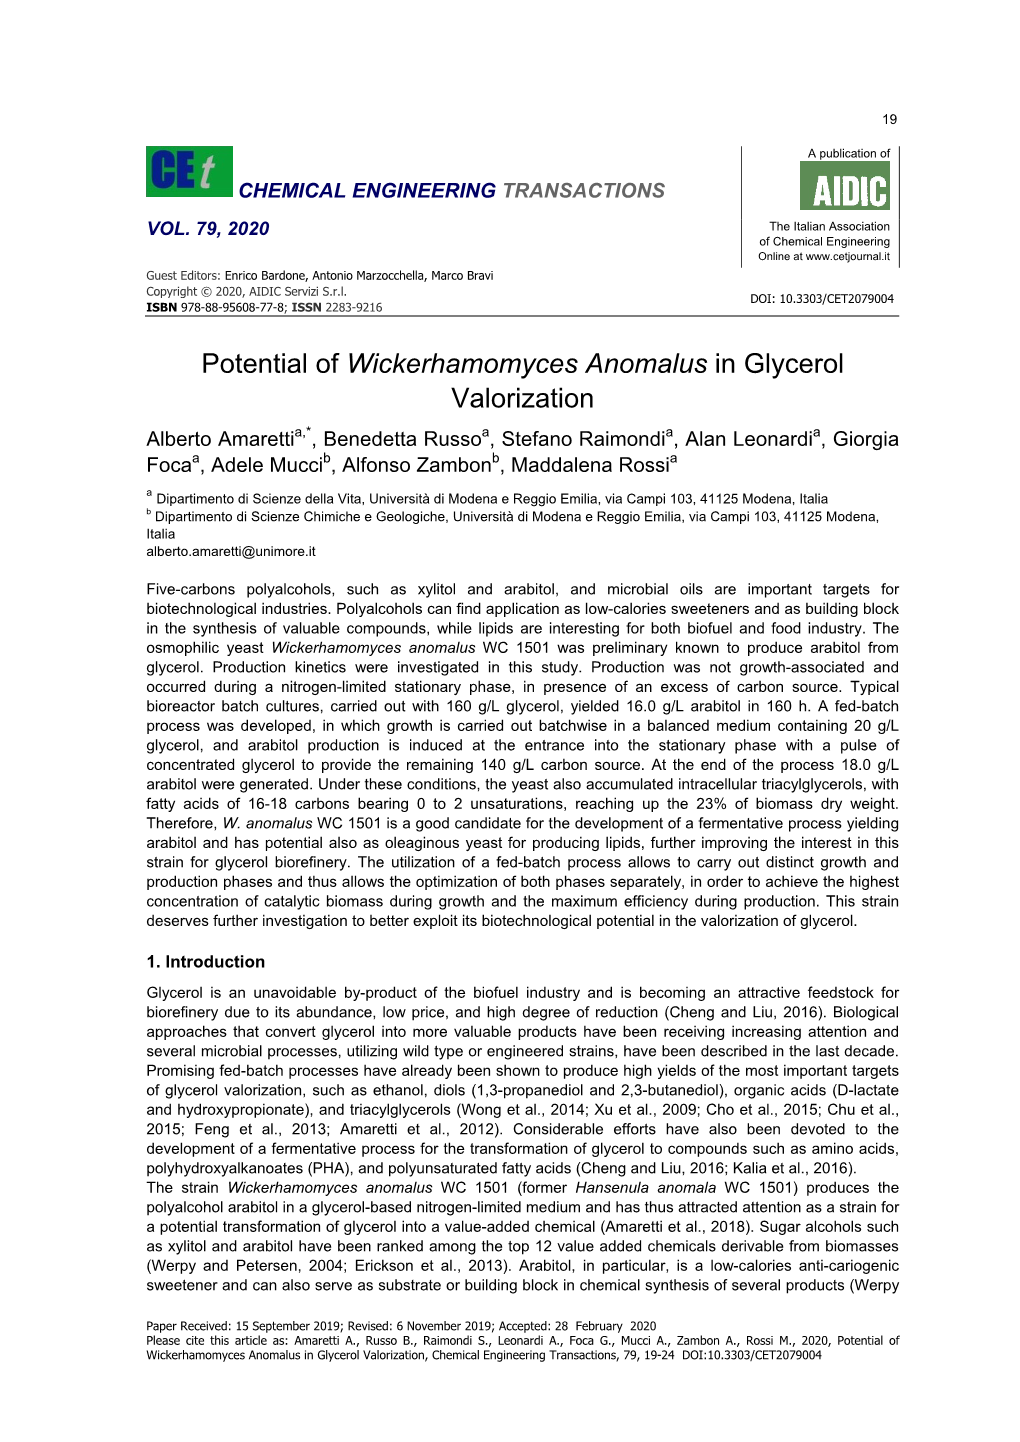 Potential of Wickerhamomyces Anomalus in Glycerol Valorization, Chemical Engineering Transactions, 79, 19-24 DOI:10.3303/CET2079004